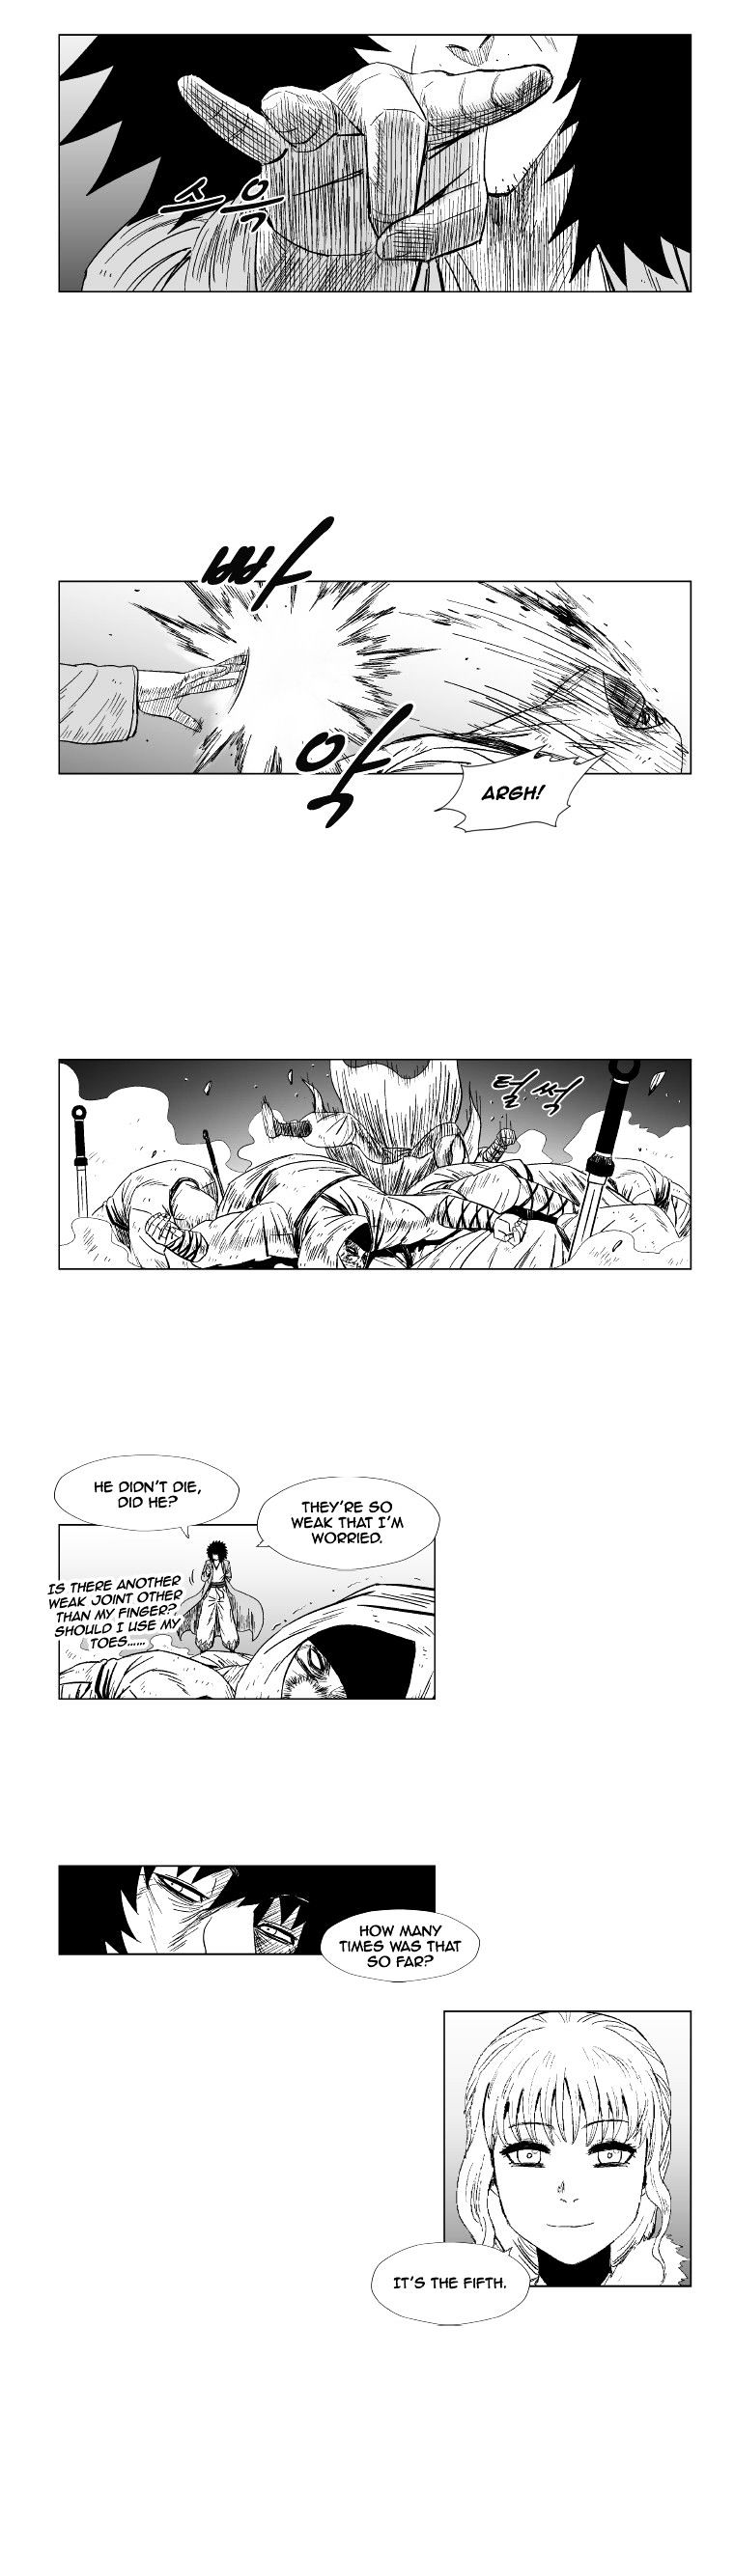 Red Storm - Page 2